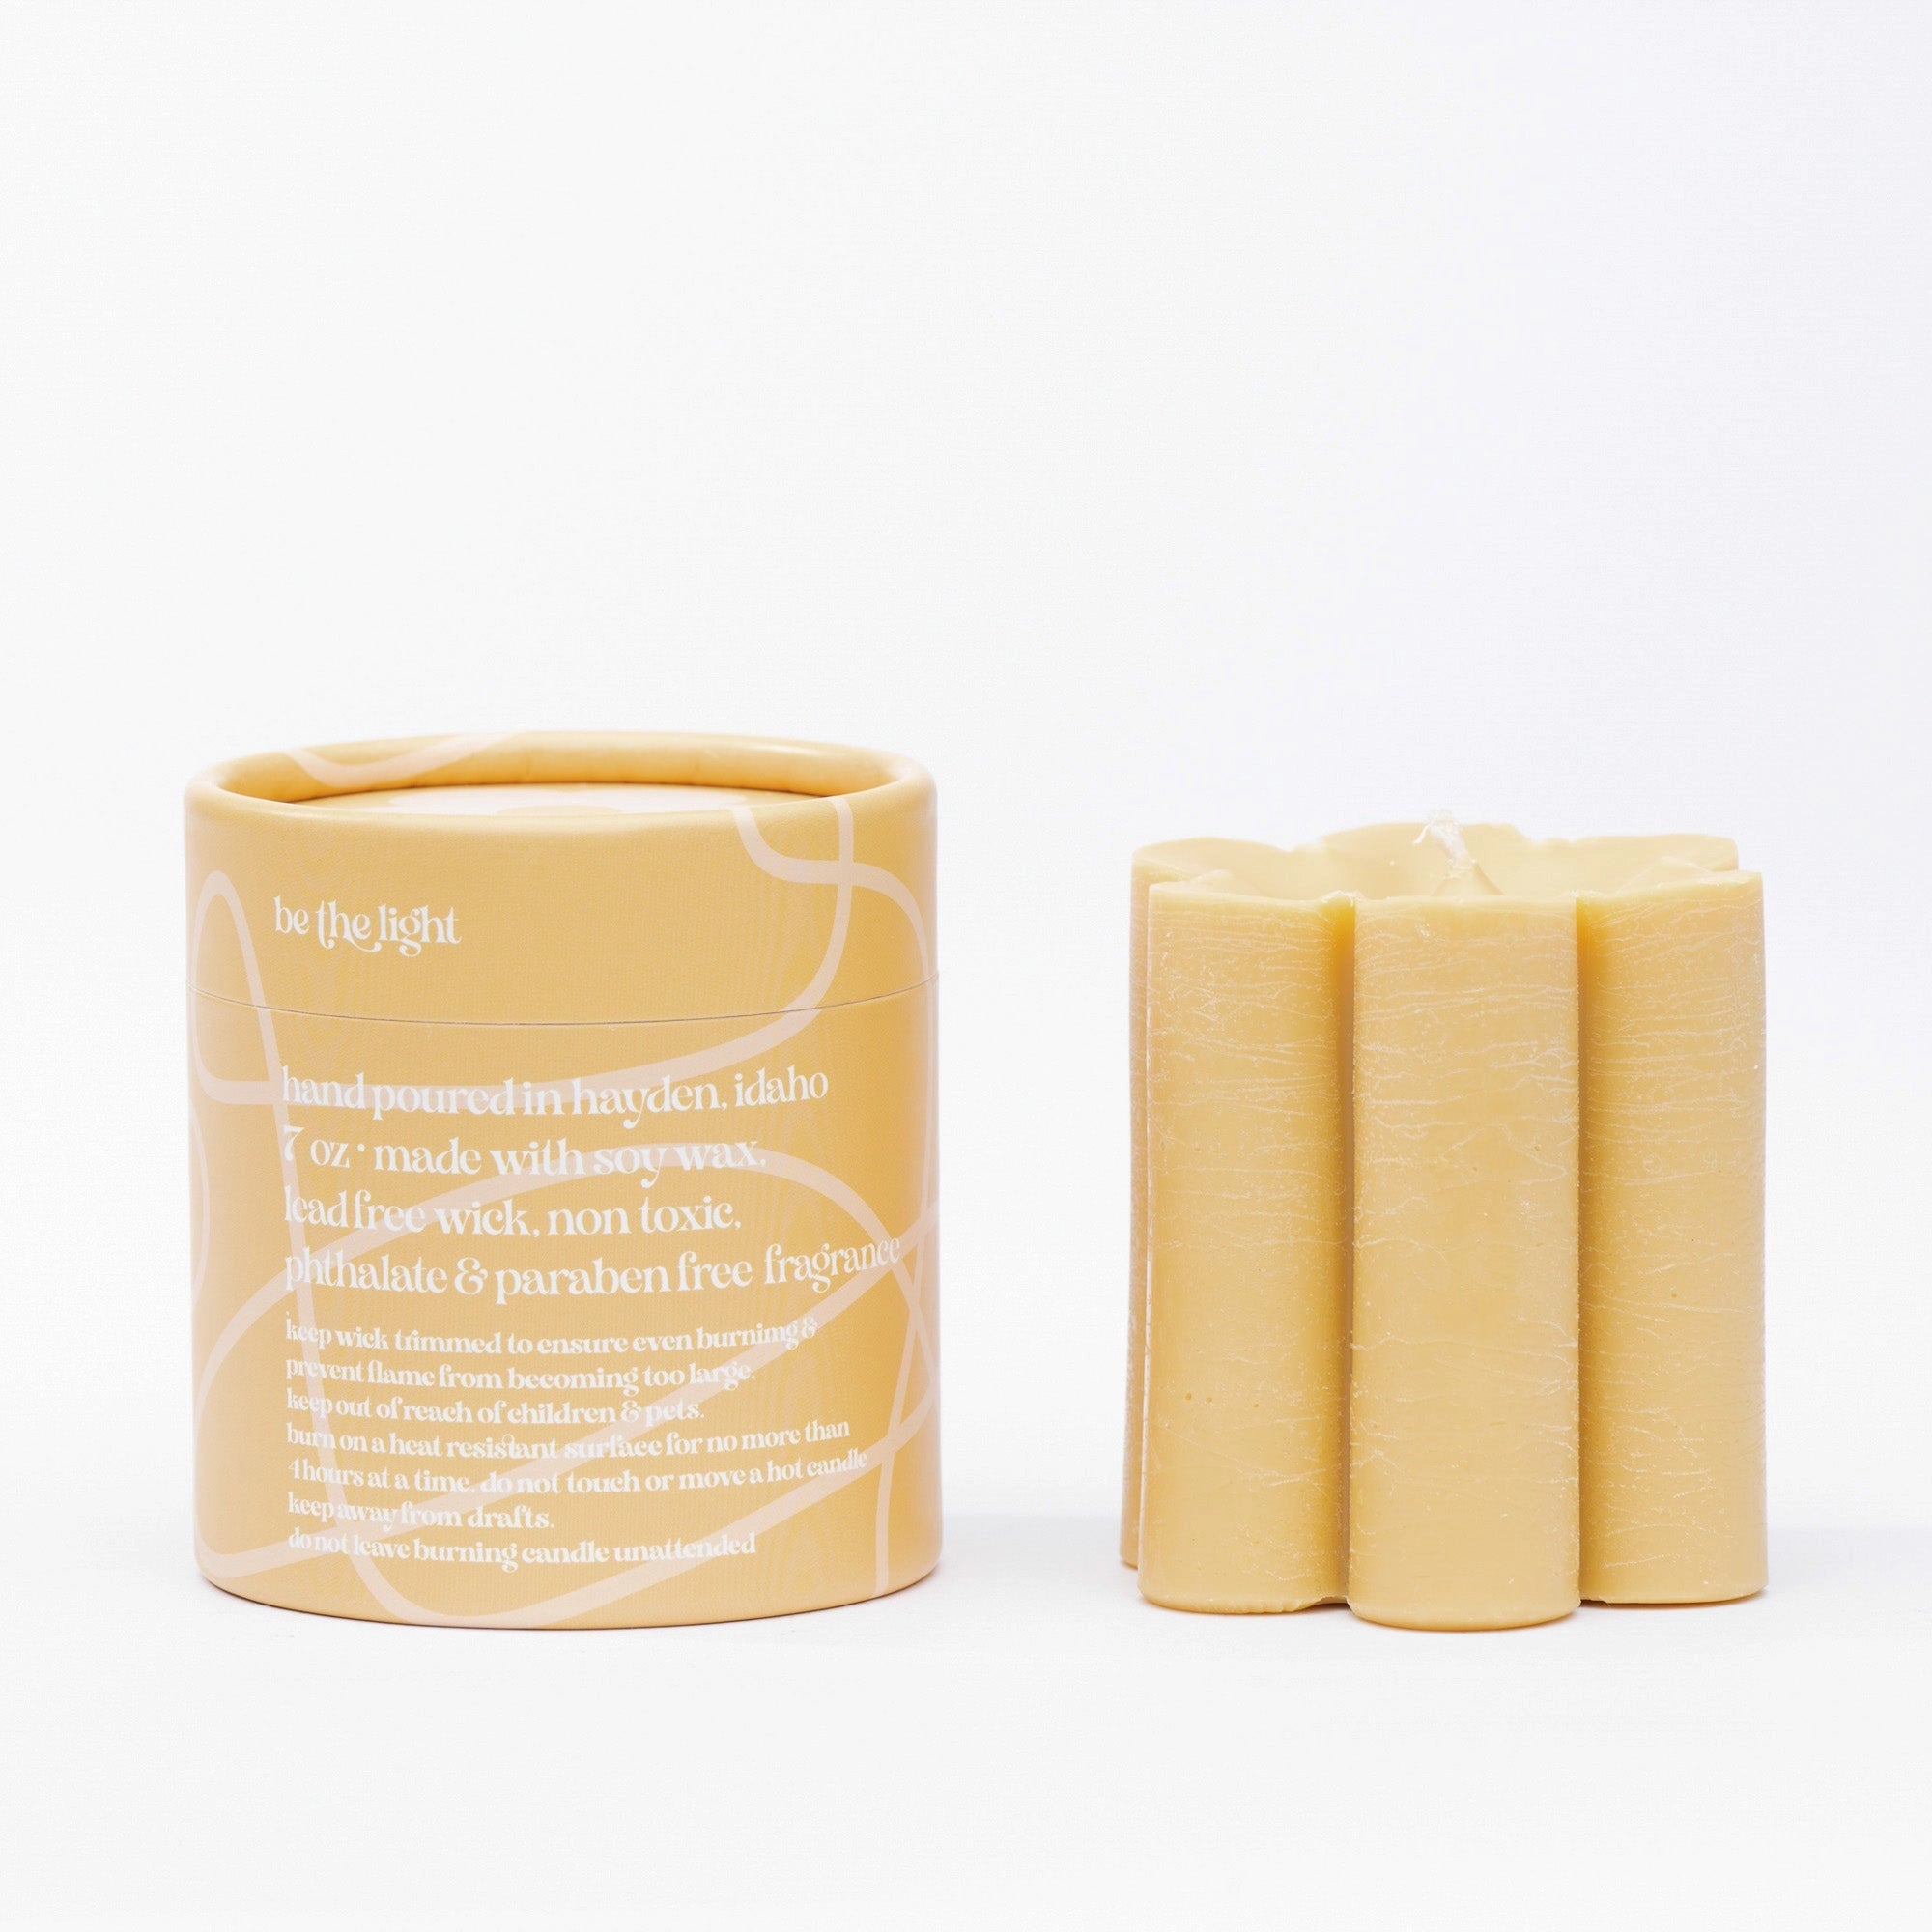 The Ochre Daisy Pillar Candle by Ginger June Candle Co.